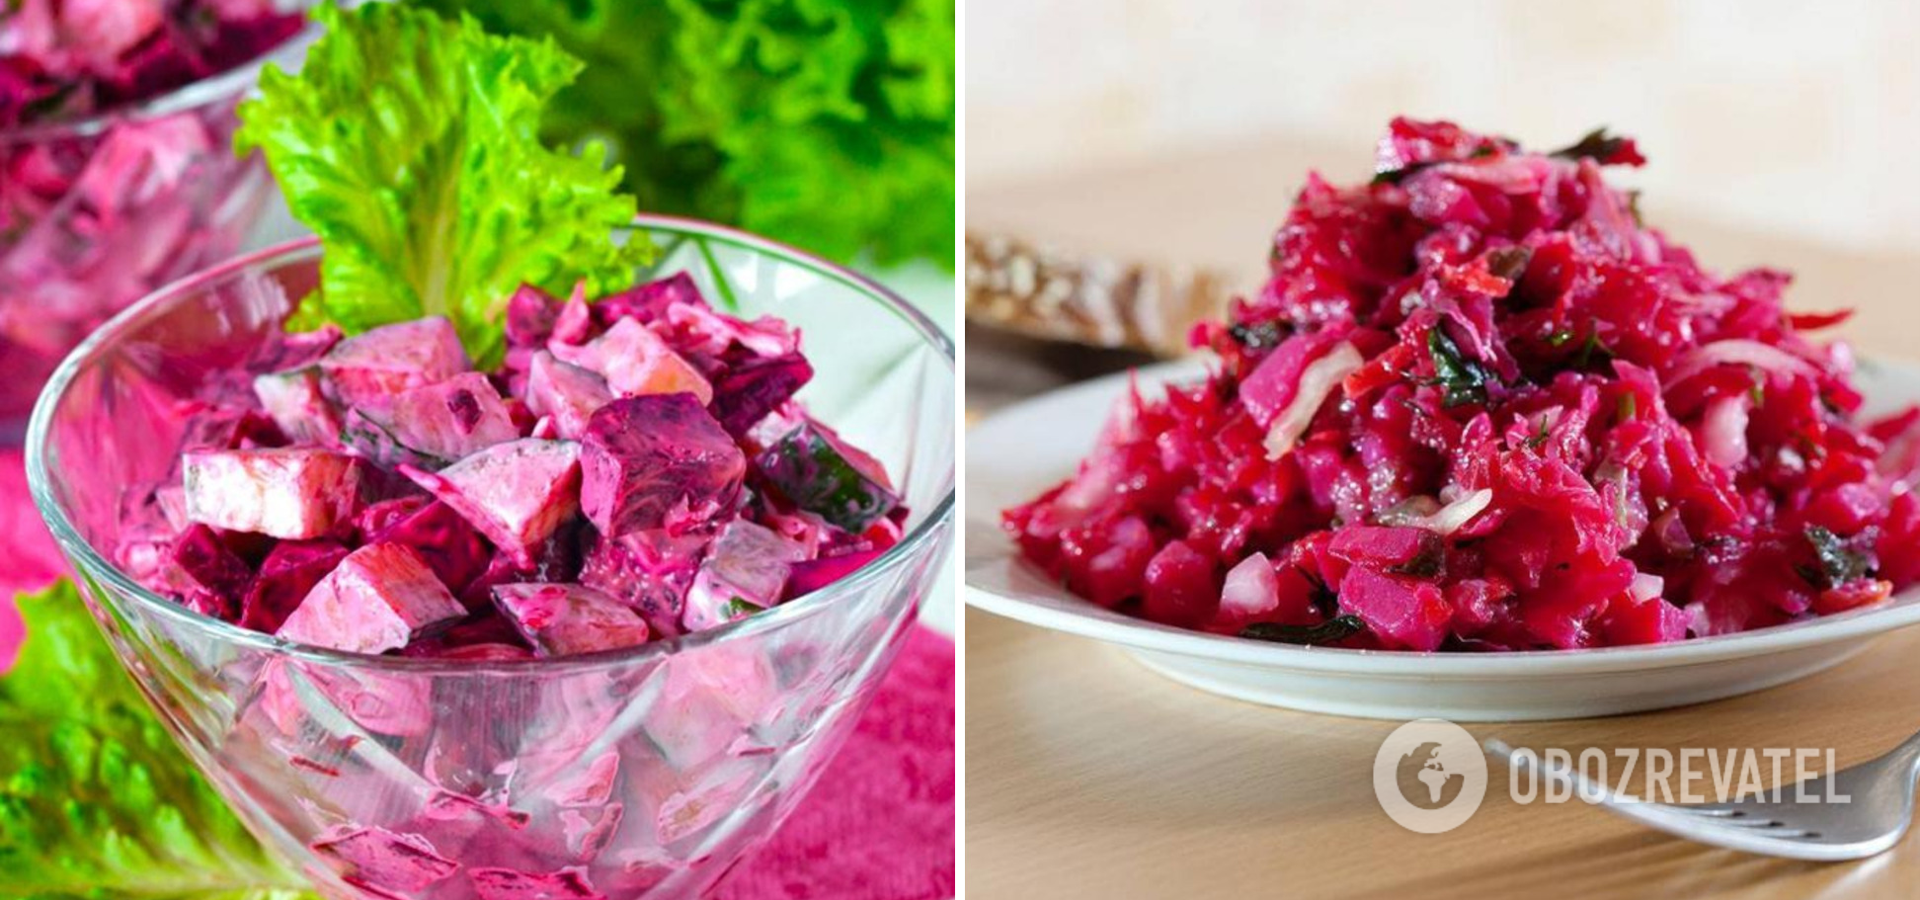 Salad with beets and pickles